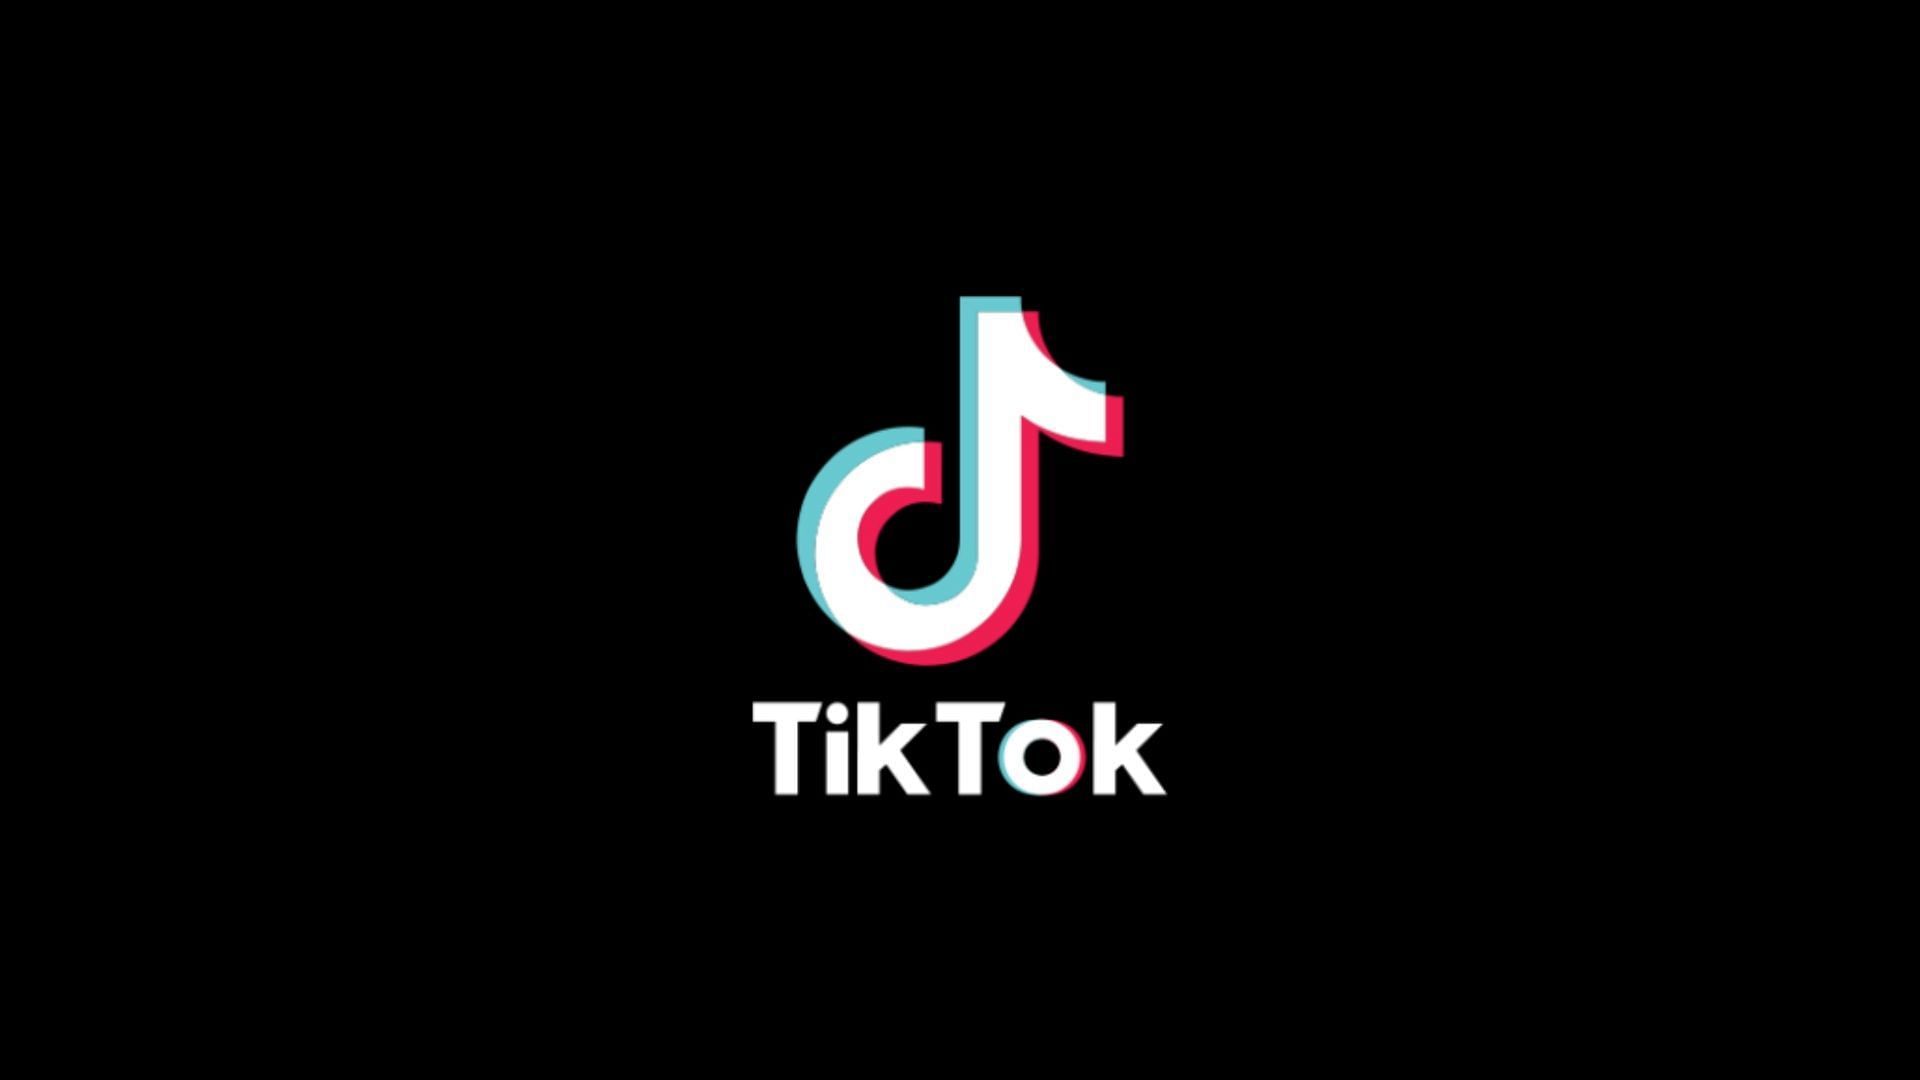 How To Use The AI Manga TikTok Filter (And Why You Can't Find It)